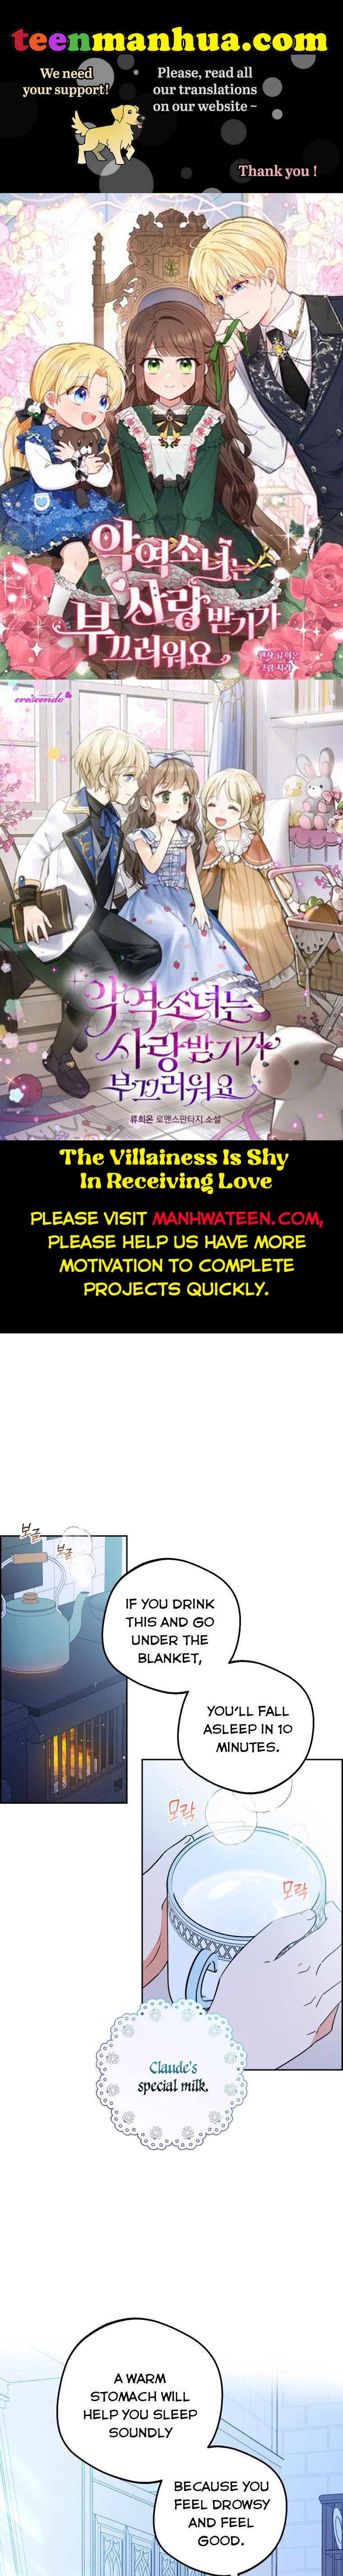 The Villainess Is Shy In Receiving Love - Page 1